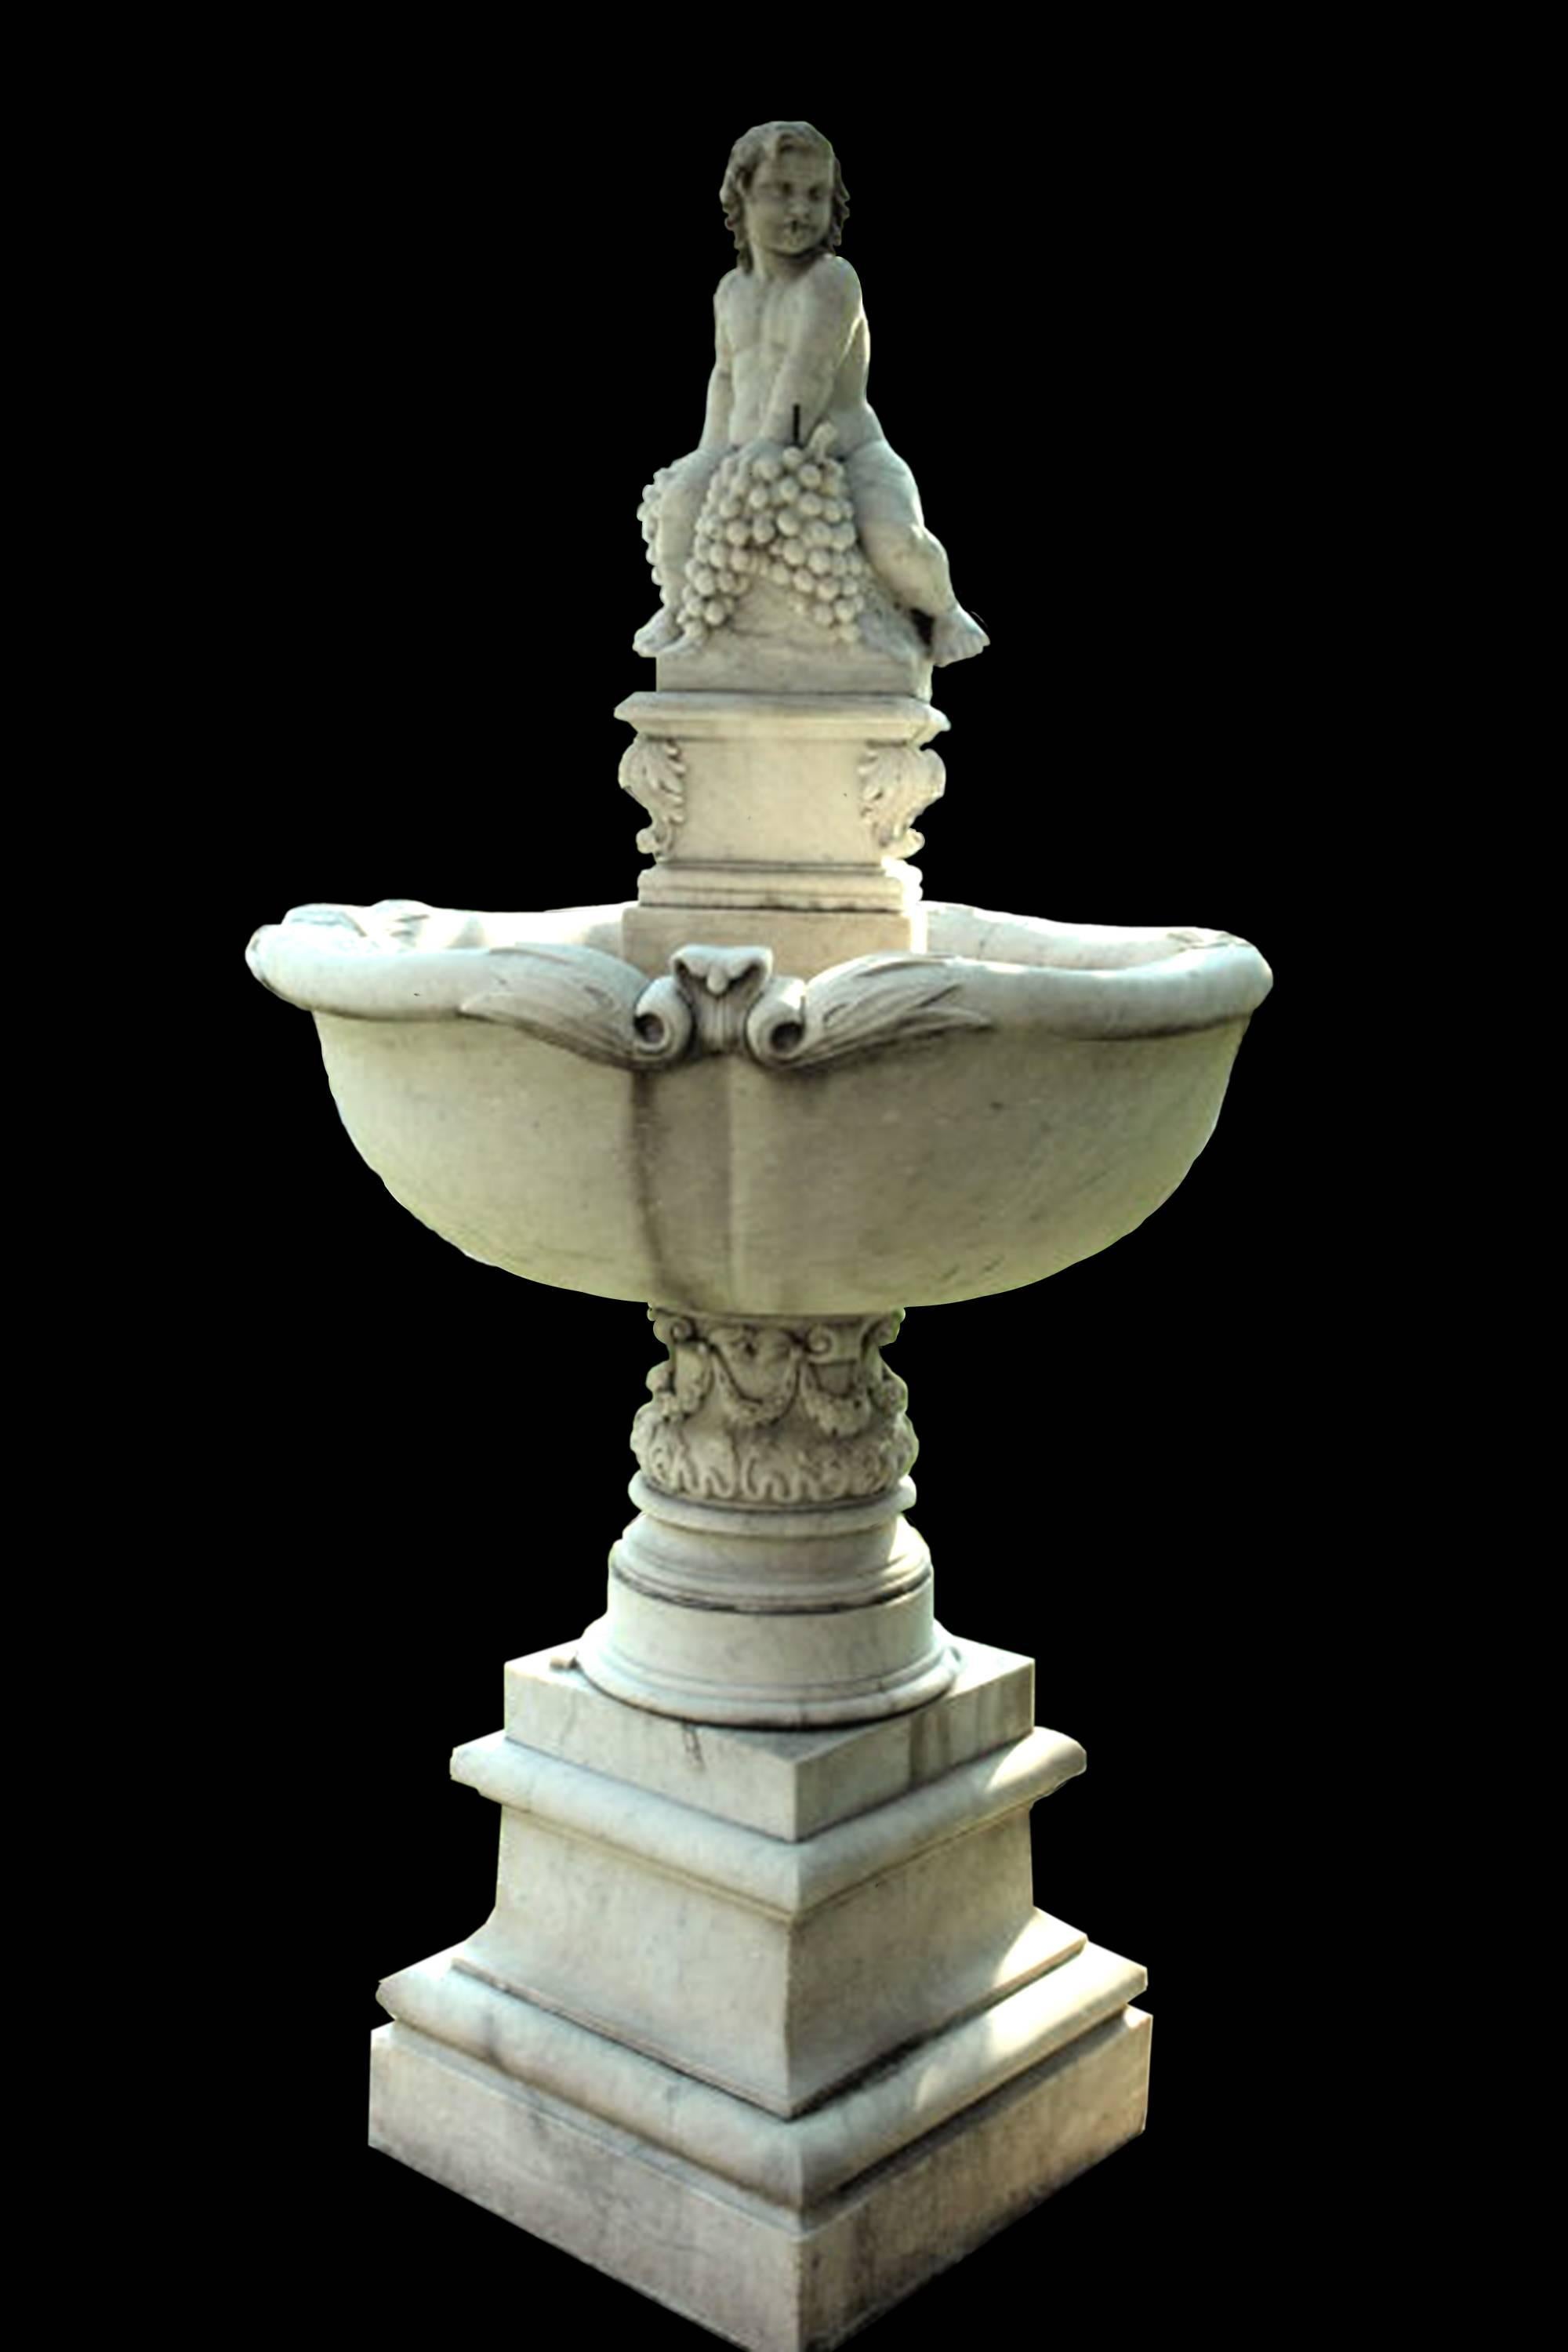 Bacchus marble fountain. American Century Itailian Carrara marble fountain c.1890 with a figure portraying Bacchus as a baby seated atop a round basin.